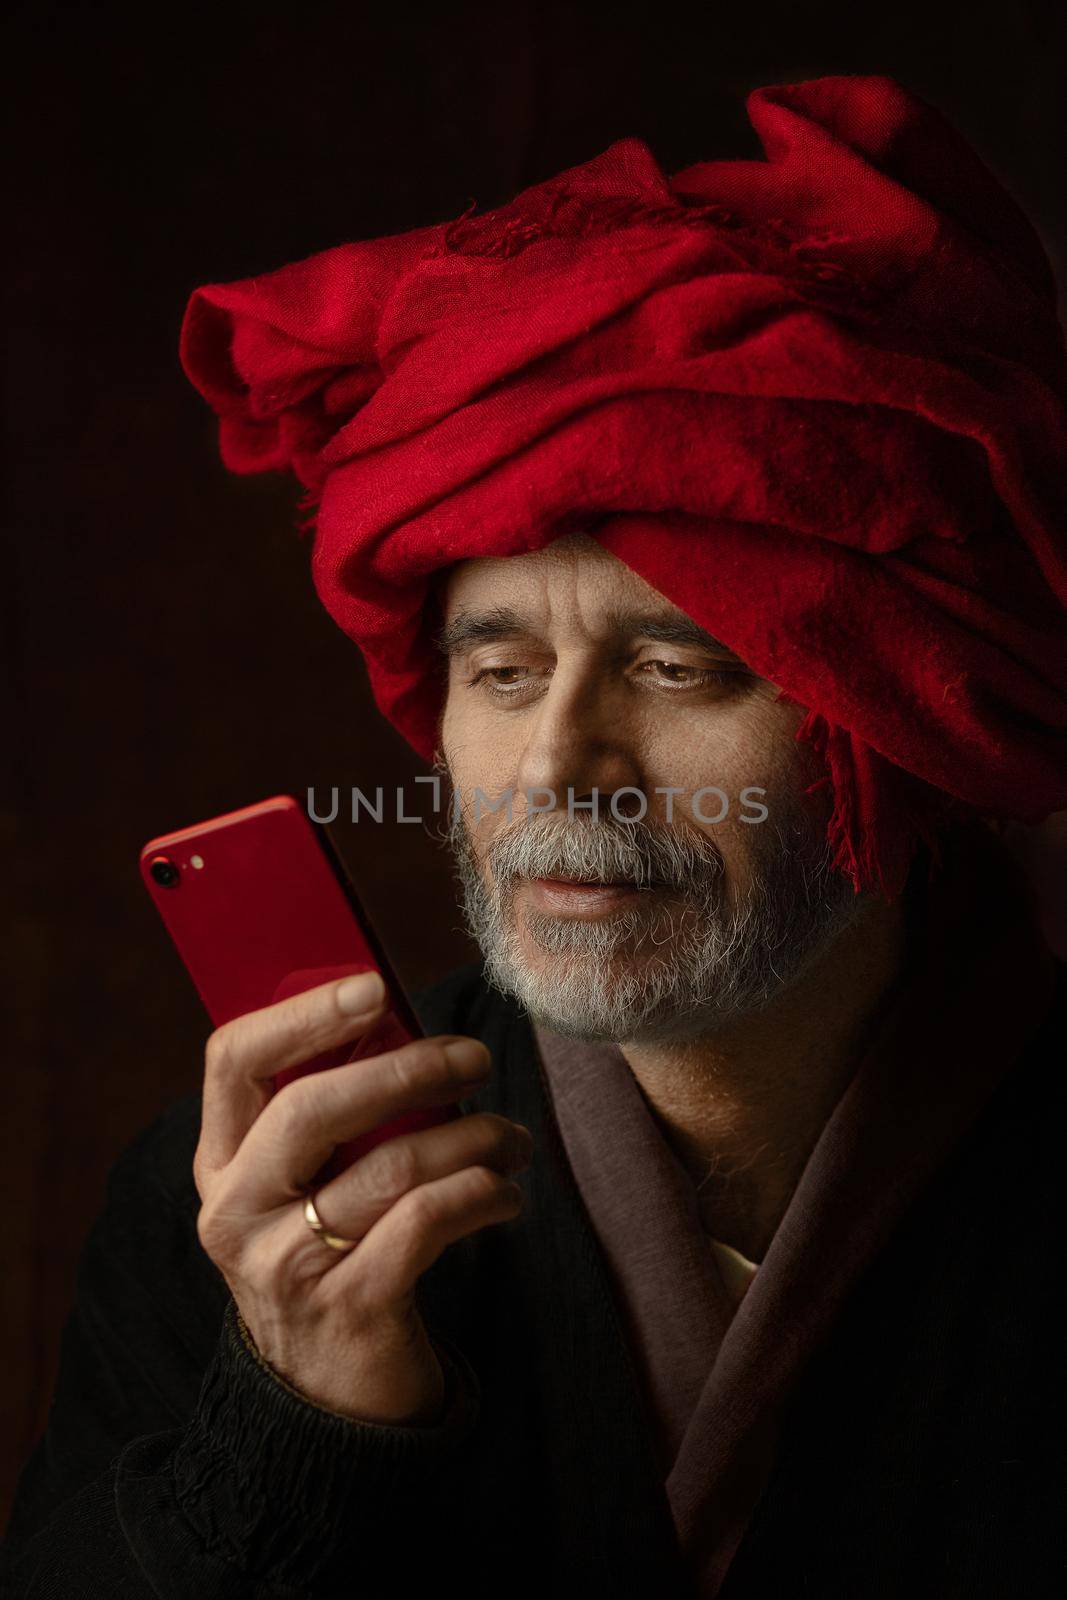 homage to Jan van Eyck's painting a man in a red turban - a photo portrait of a 21st century man with a red mobile phone matching the color of the turban by Costin